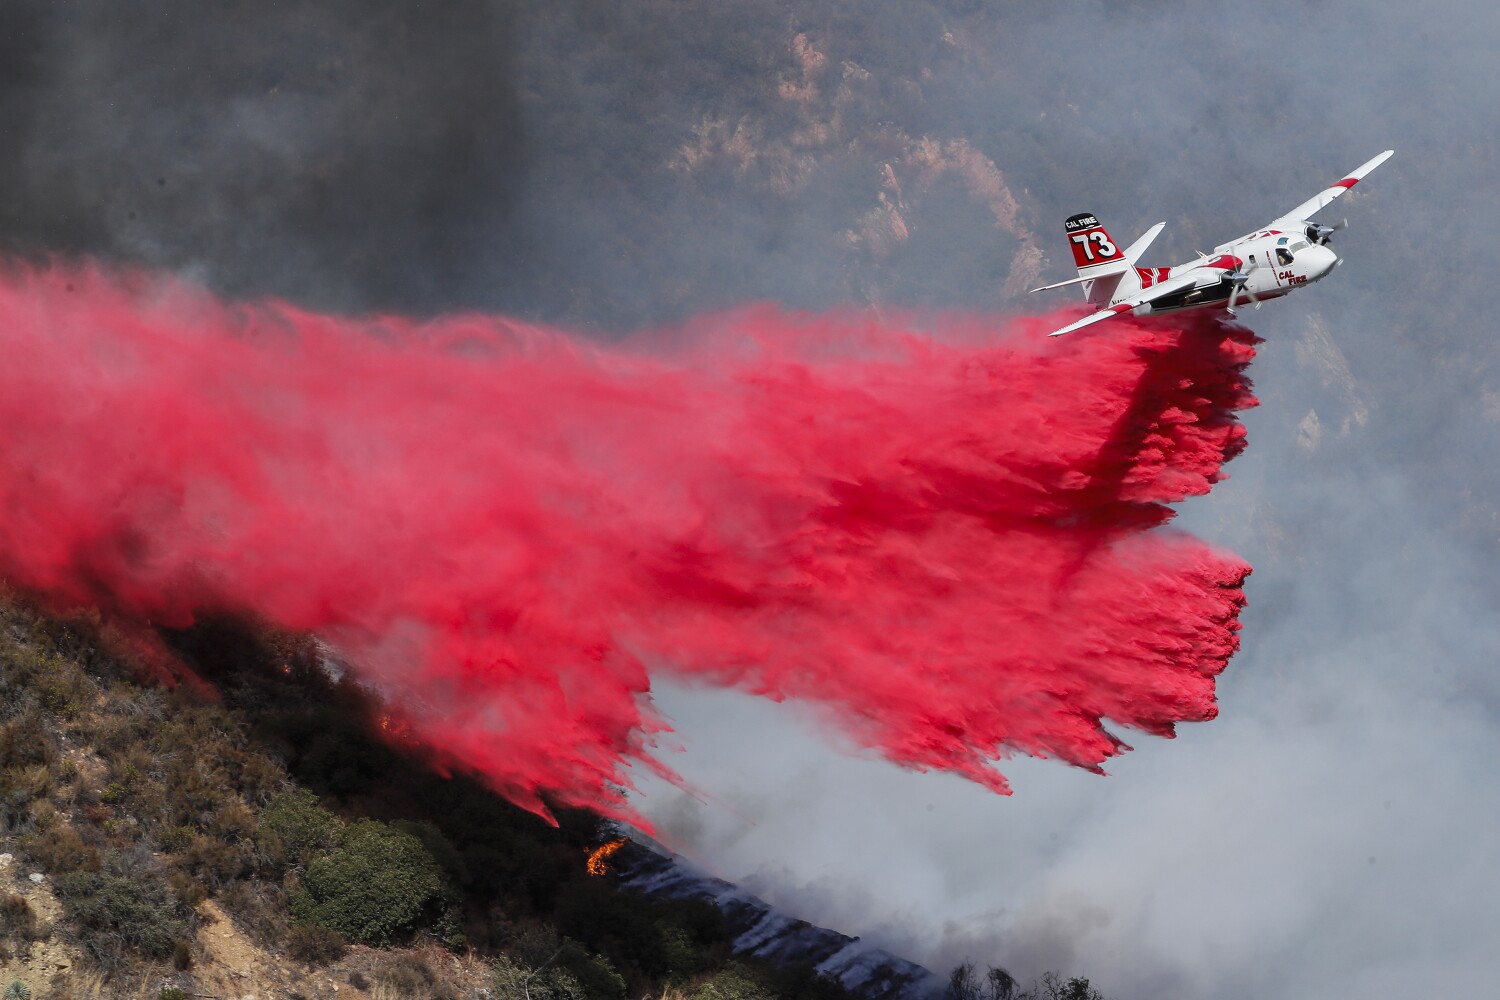 Wildfire in Angeles National Forest is 75% contained, officials say